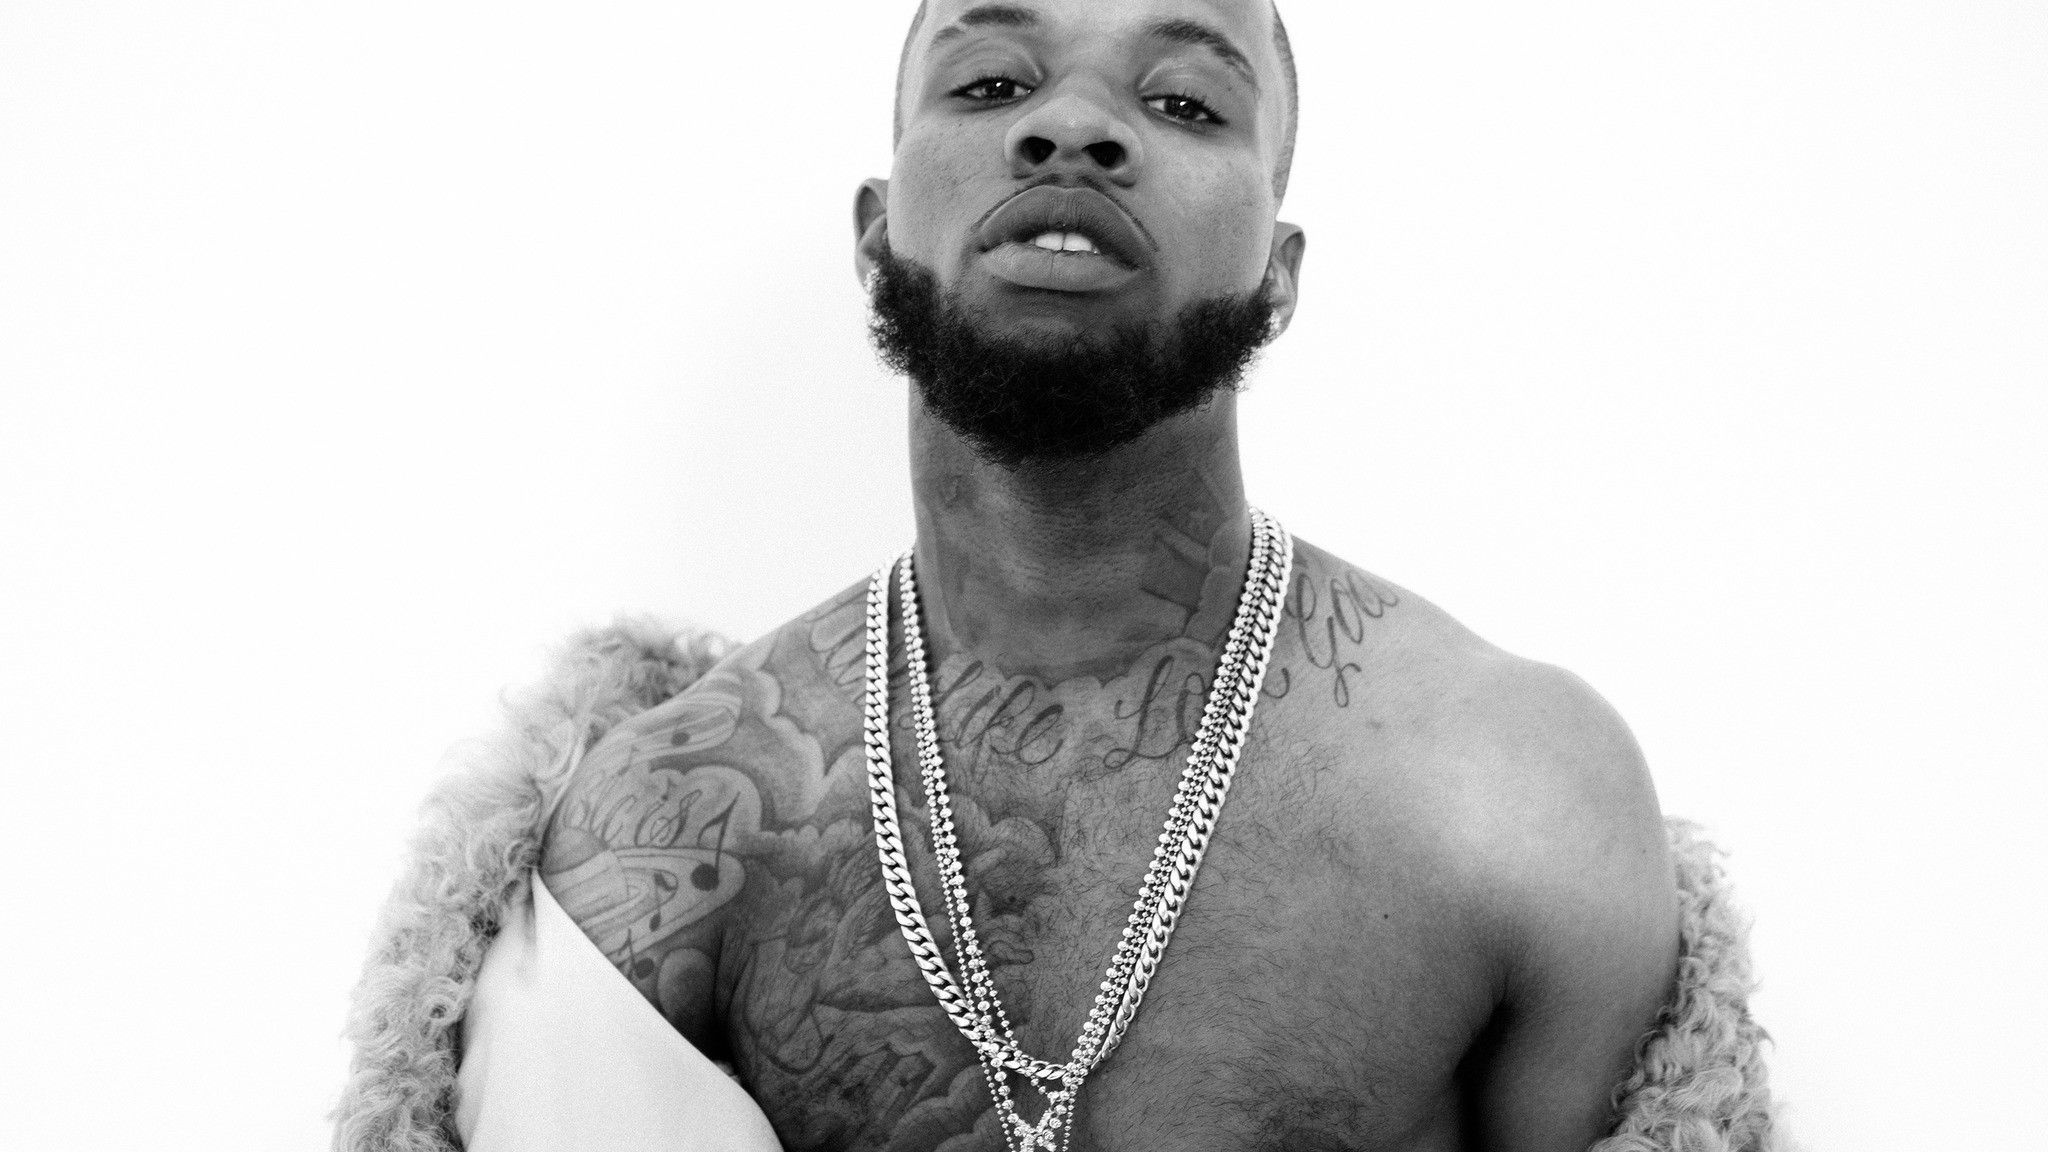 Tory Lanez Wallpapers - Top Free Tory Lanez Backgrounds 2050x1160